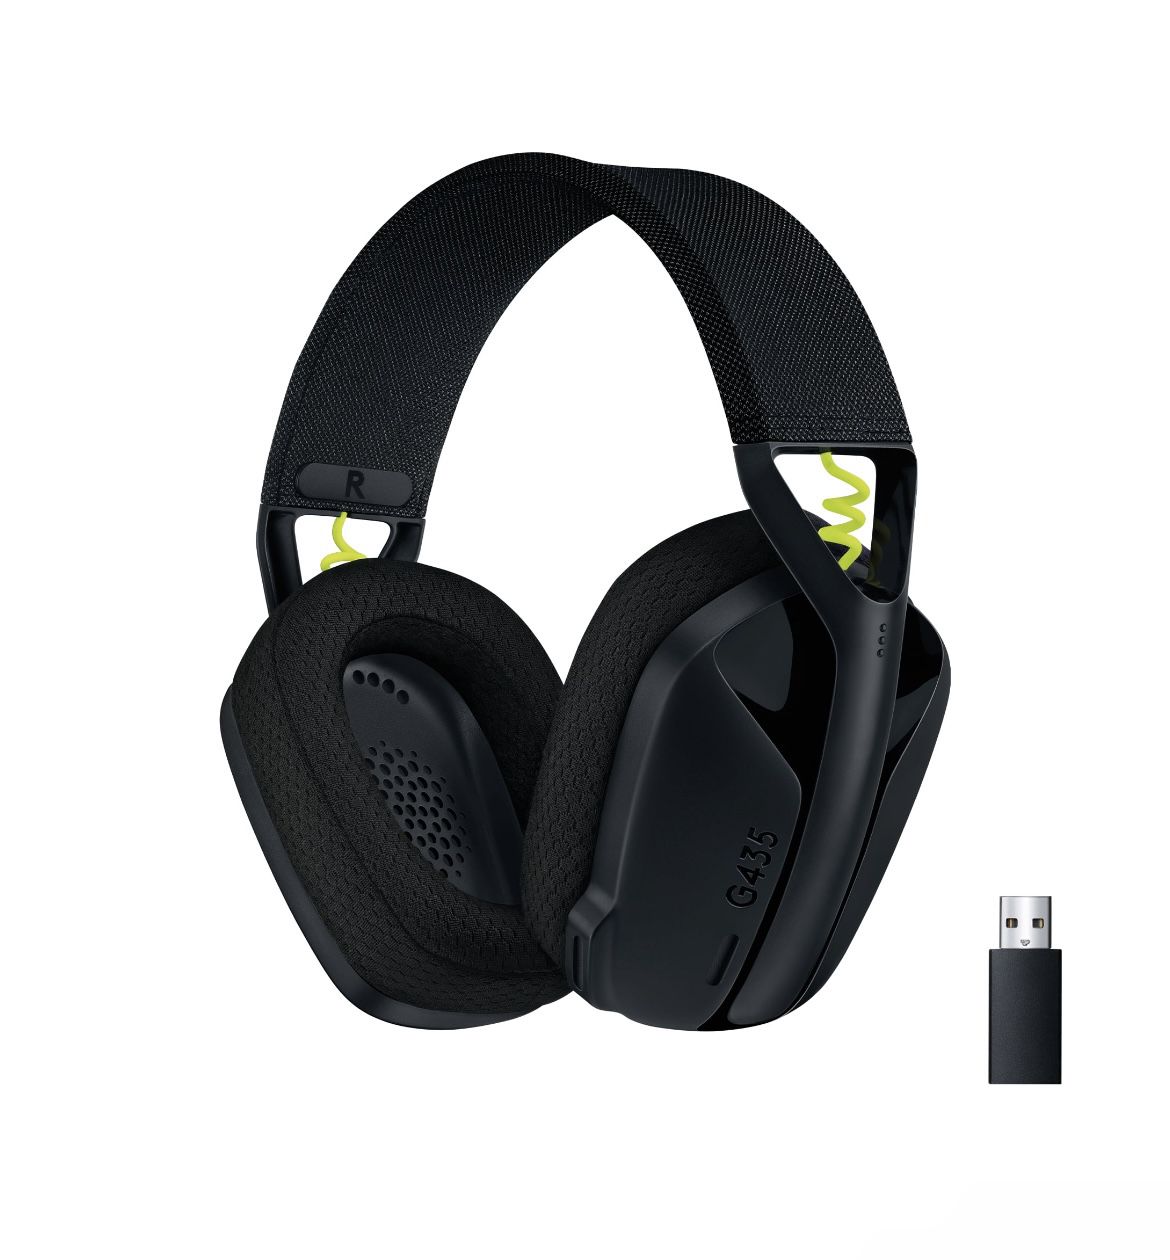 Logitech G435 LIGHTSPEED and Bluetooth Wireless Gaming Headset - Lightweight over-ear headphones, built-in mics, 18h battery, compatible with Dolby At